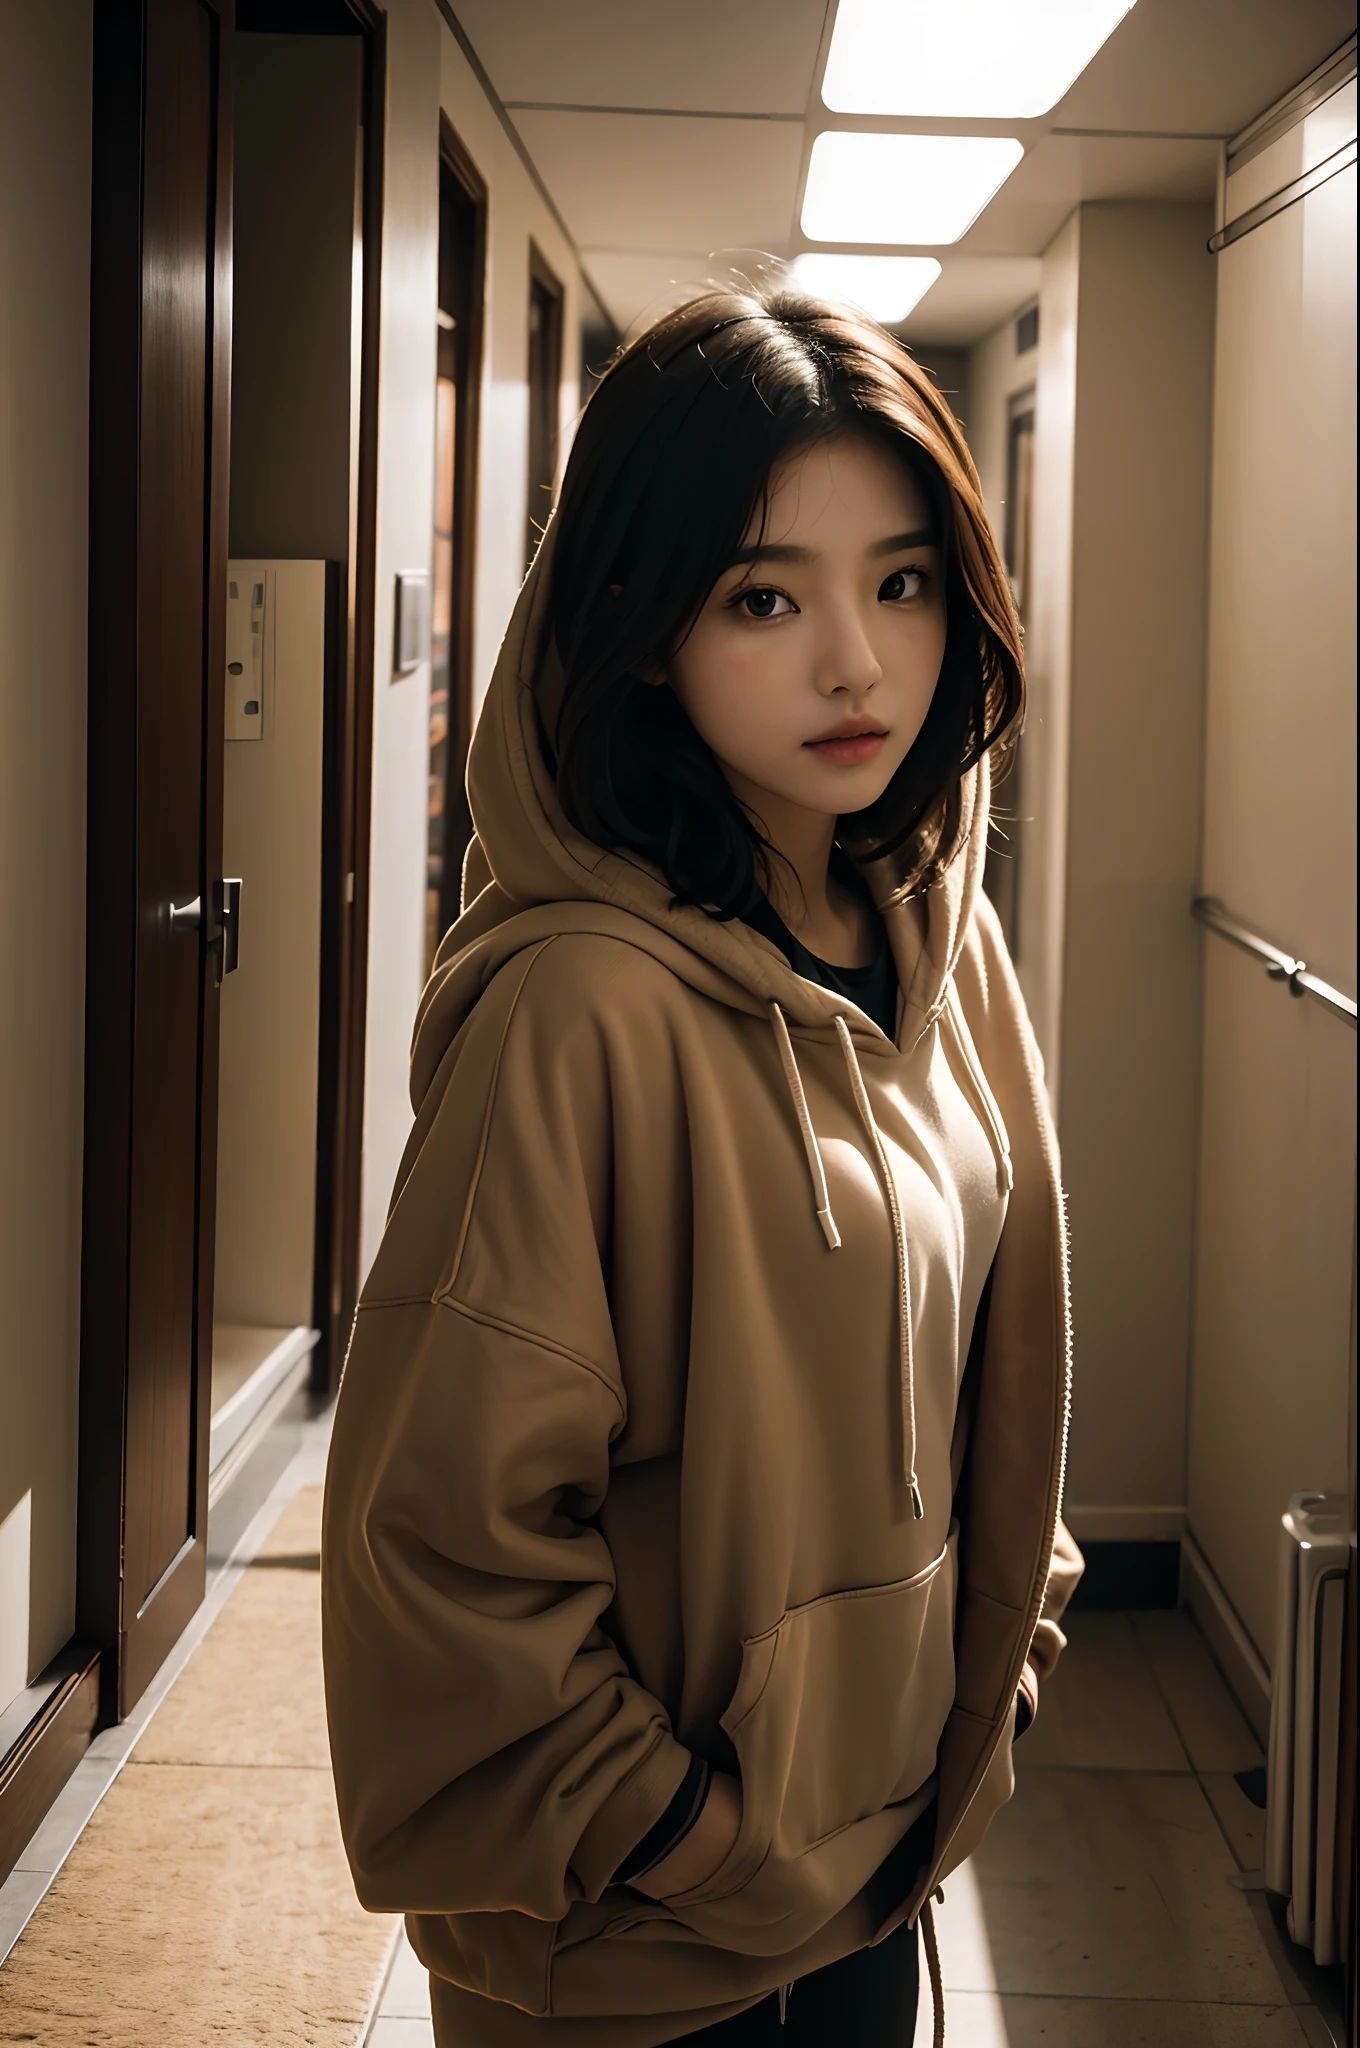 there is a woman standing in a hallway with a picture on the wall, a picture inspired by Kim Jeong-hui, tumblr, lyco art, girl wearing hoodie, she is wearing streetwear, black haired girl wearing hoodie, album art, beige hoodie, 19xx, woman in streetwear, mid shot portrait, bae suzy, e-girl, e - girl